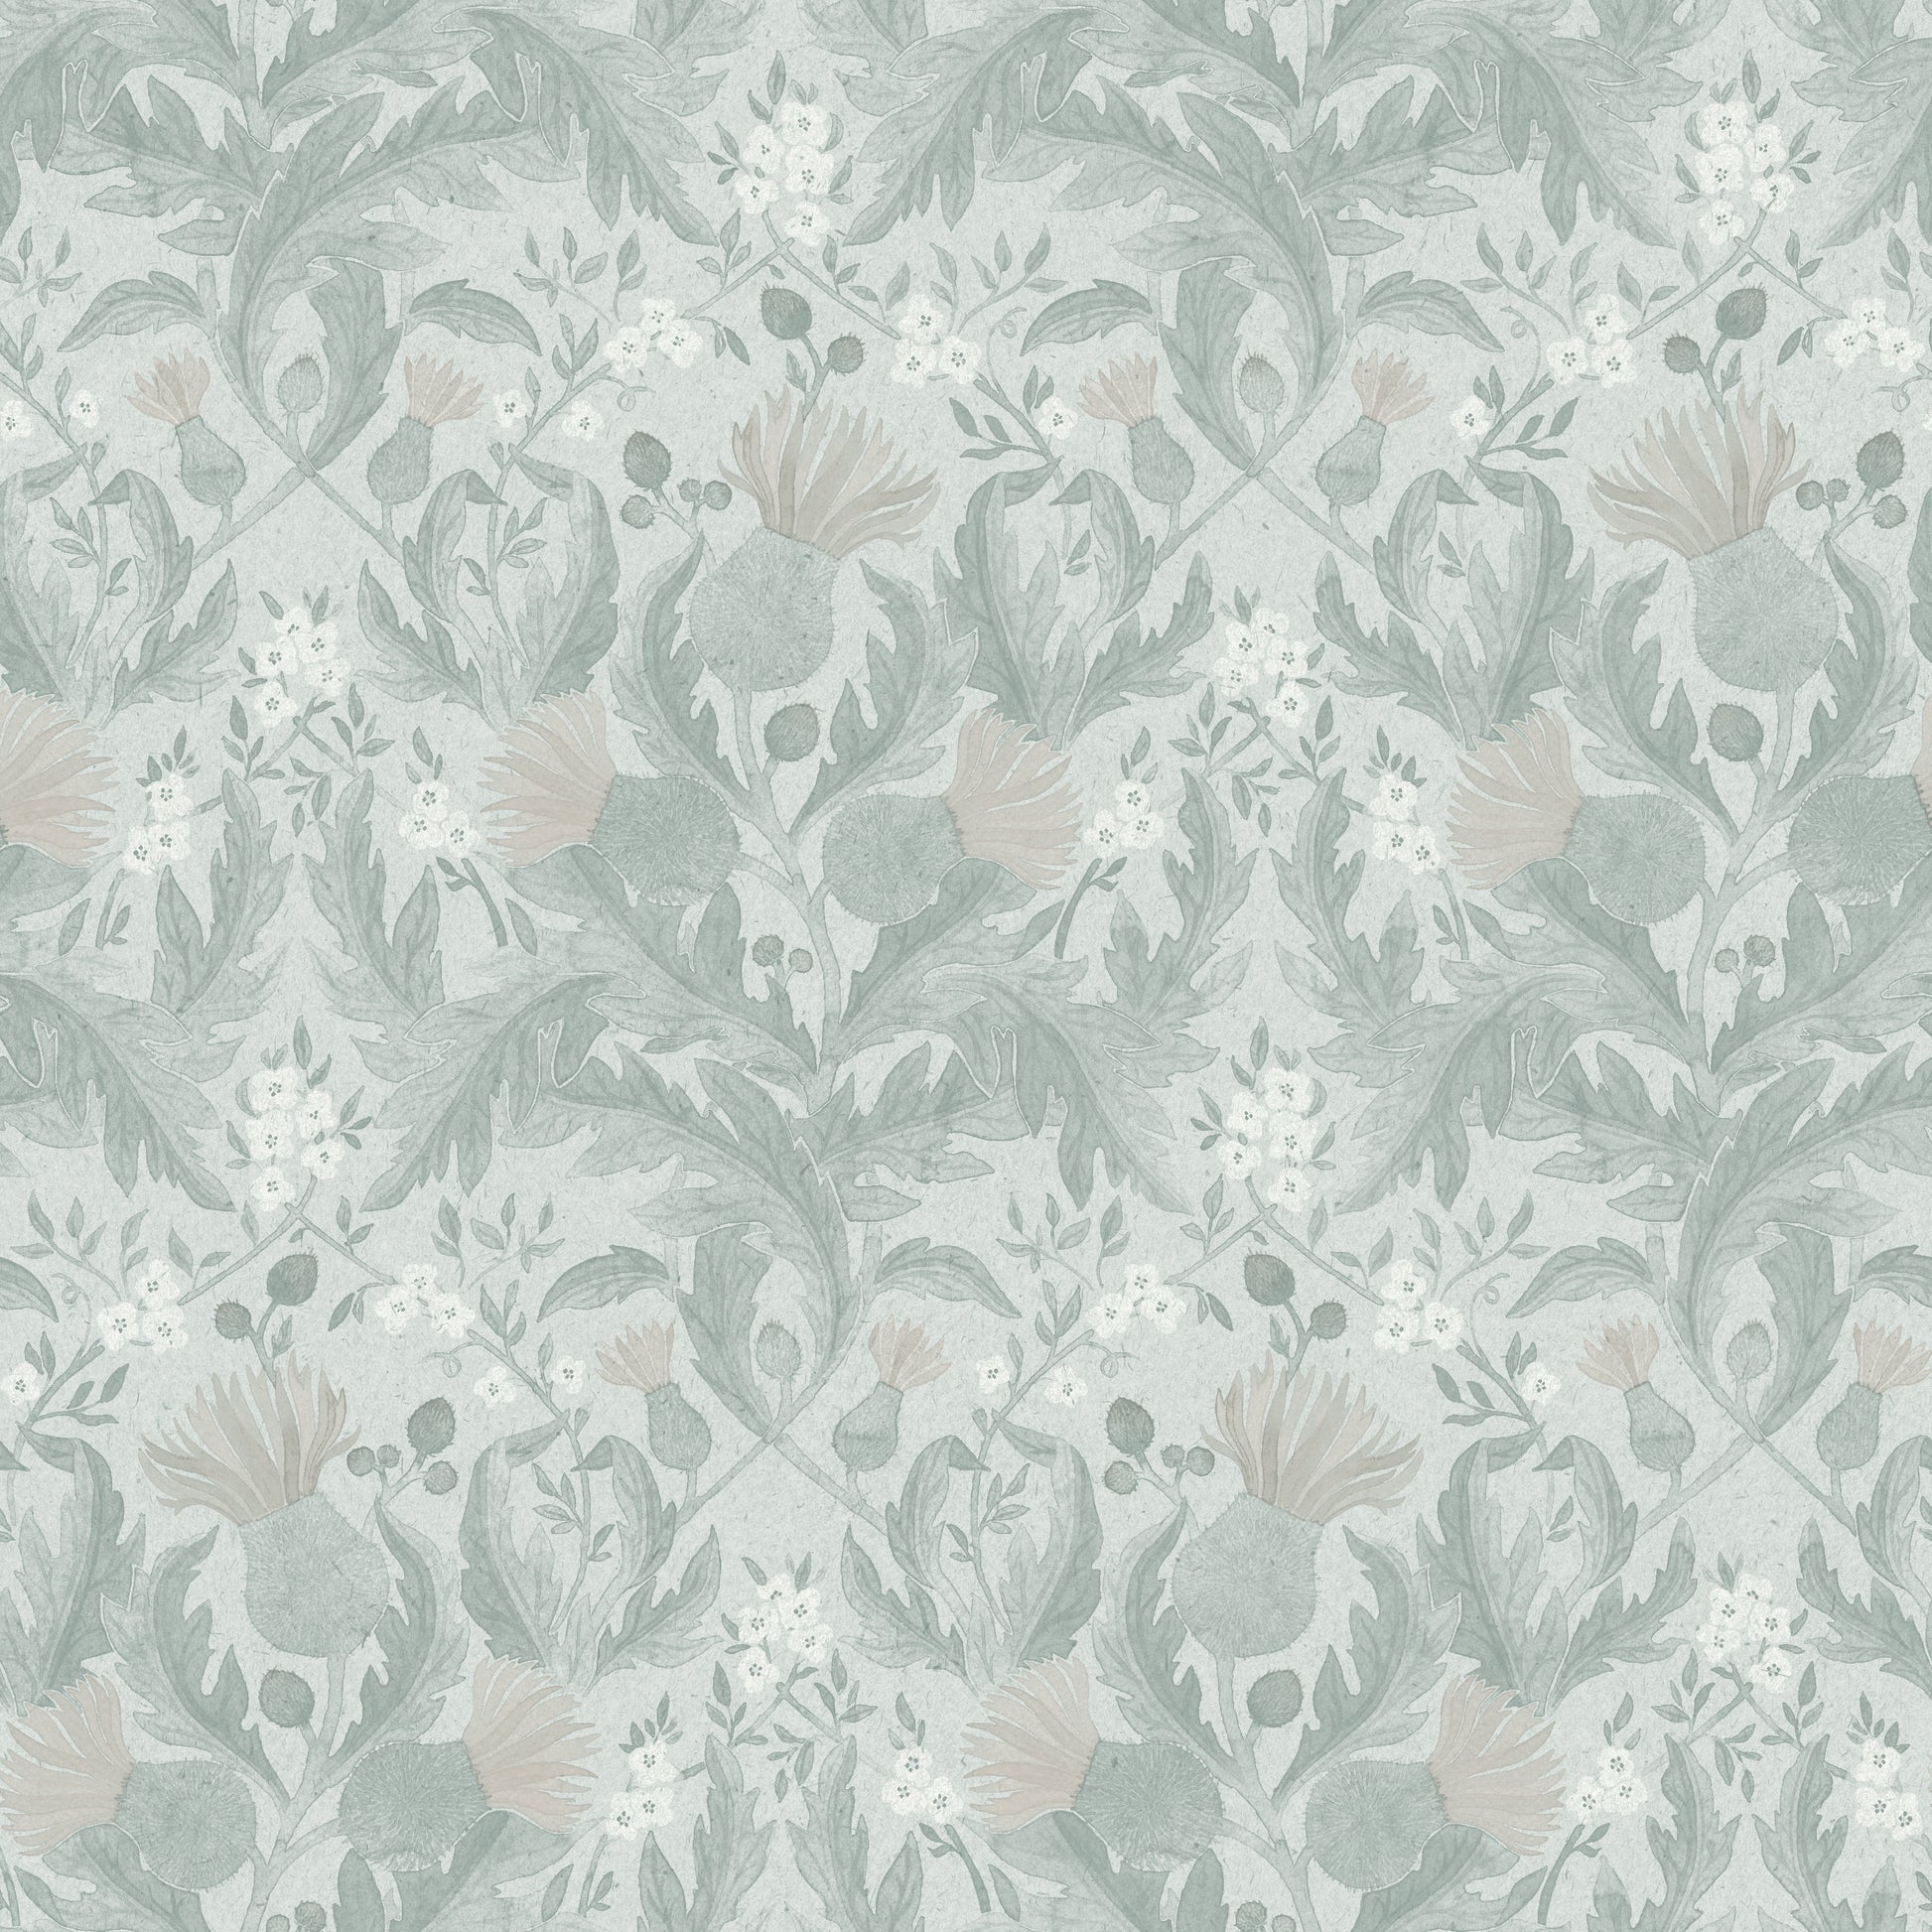 Thistle - Grey and white - Wallpaper Trader